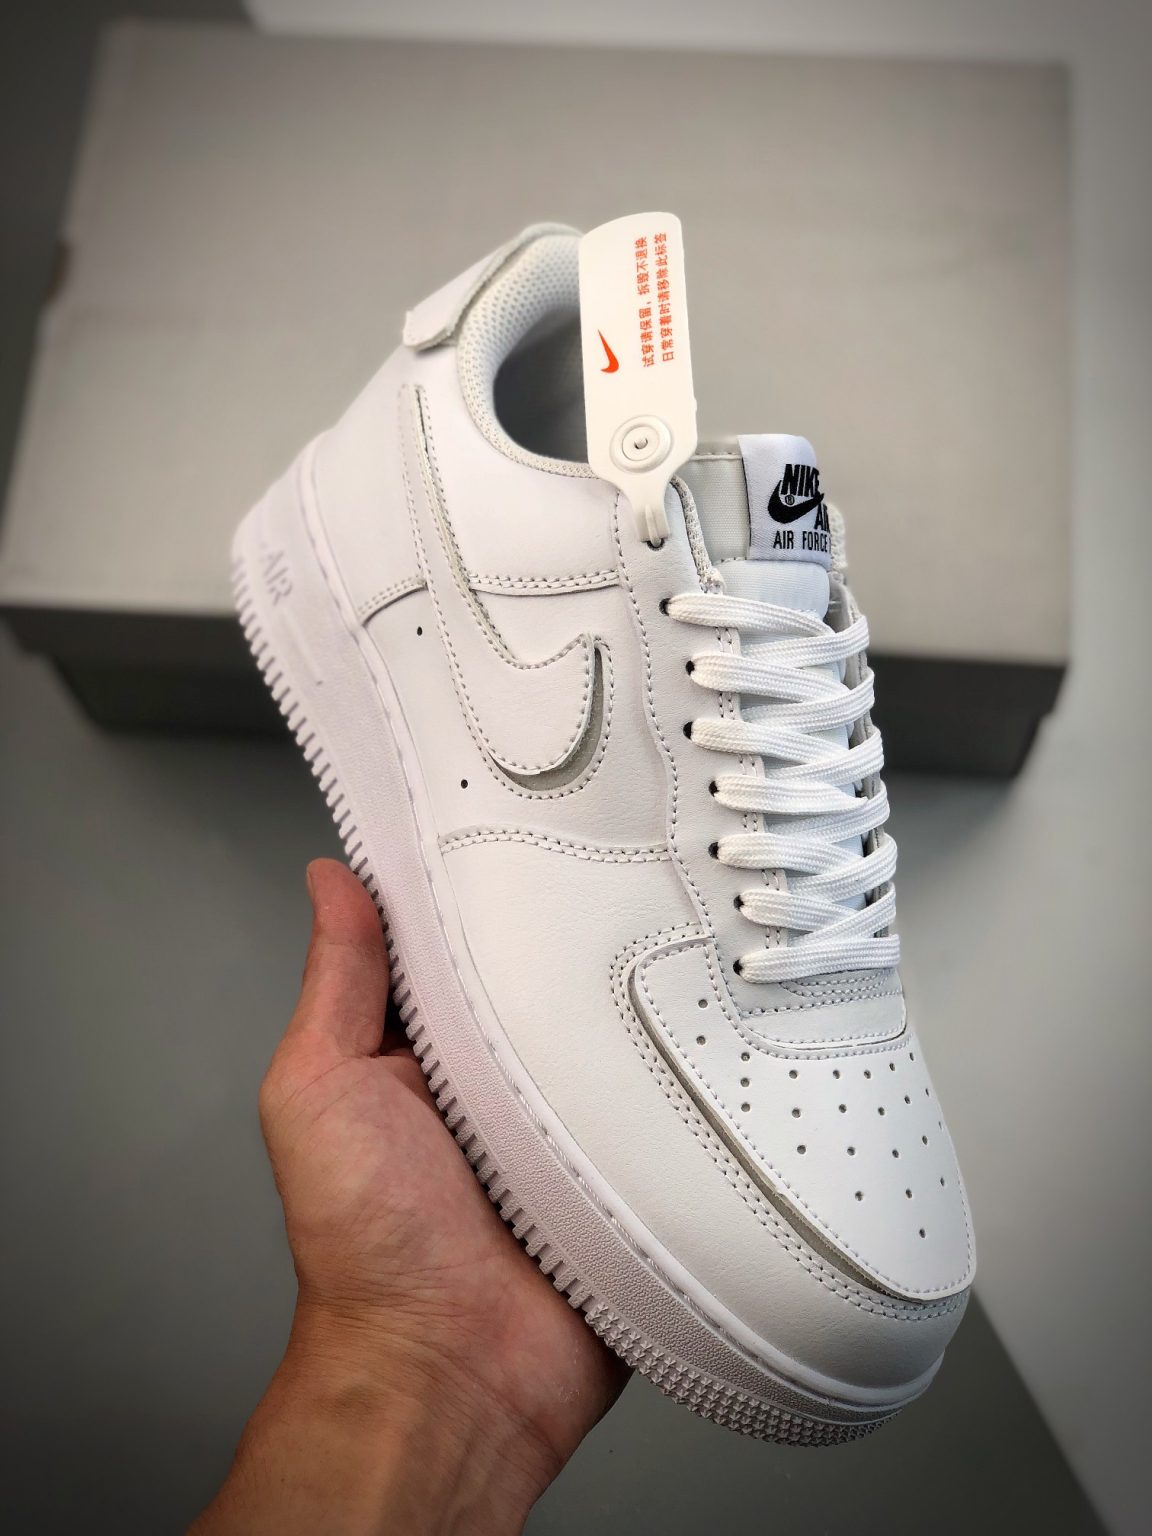 Nike Air Force 1 Low Triple White DB2812-100 For Sale – Sneaker Hello